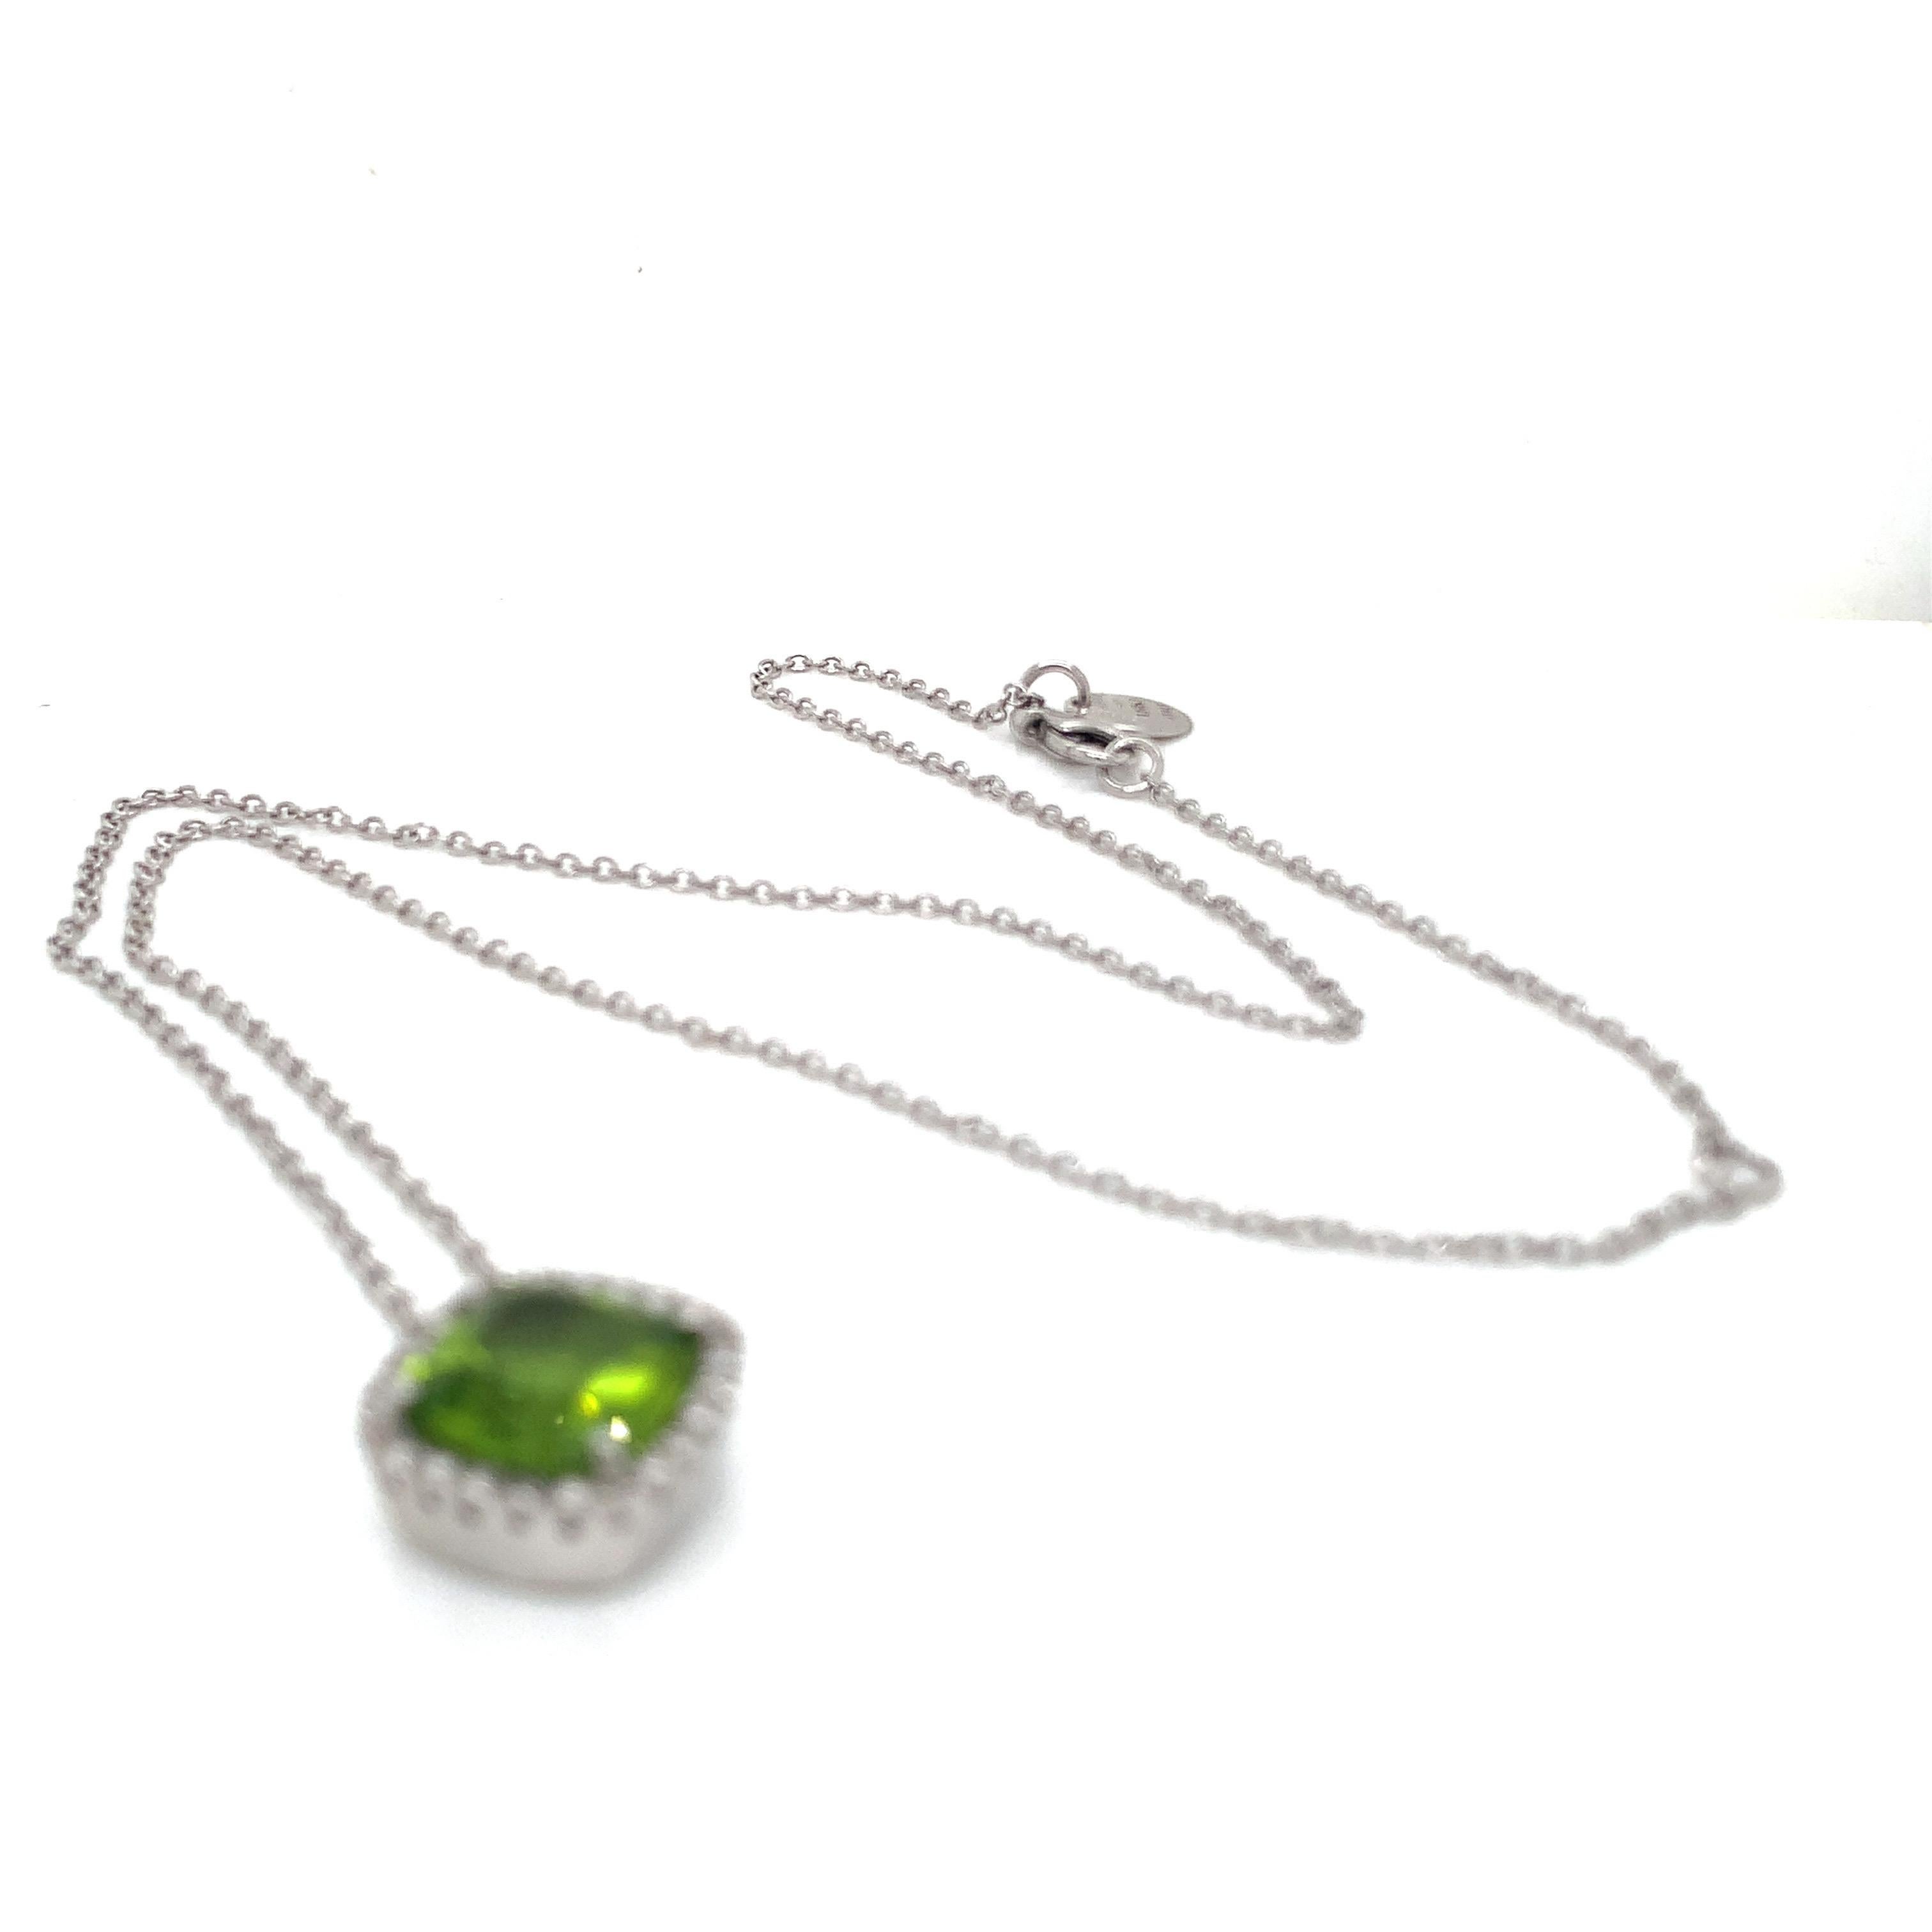 18 Karat White Gold Peridot and Diamond Garavelli Pendant with Necklace For Sale 2